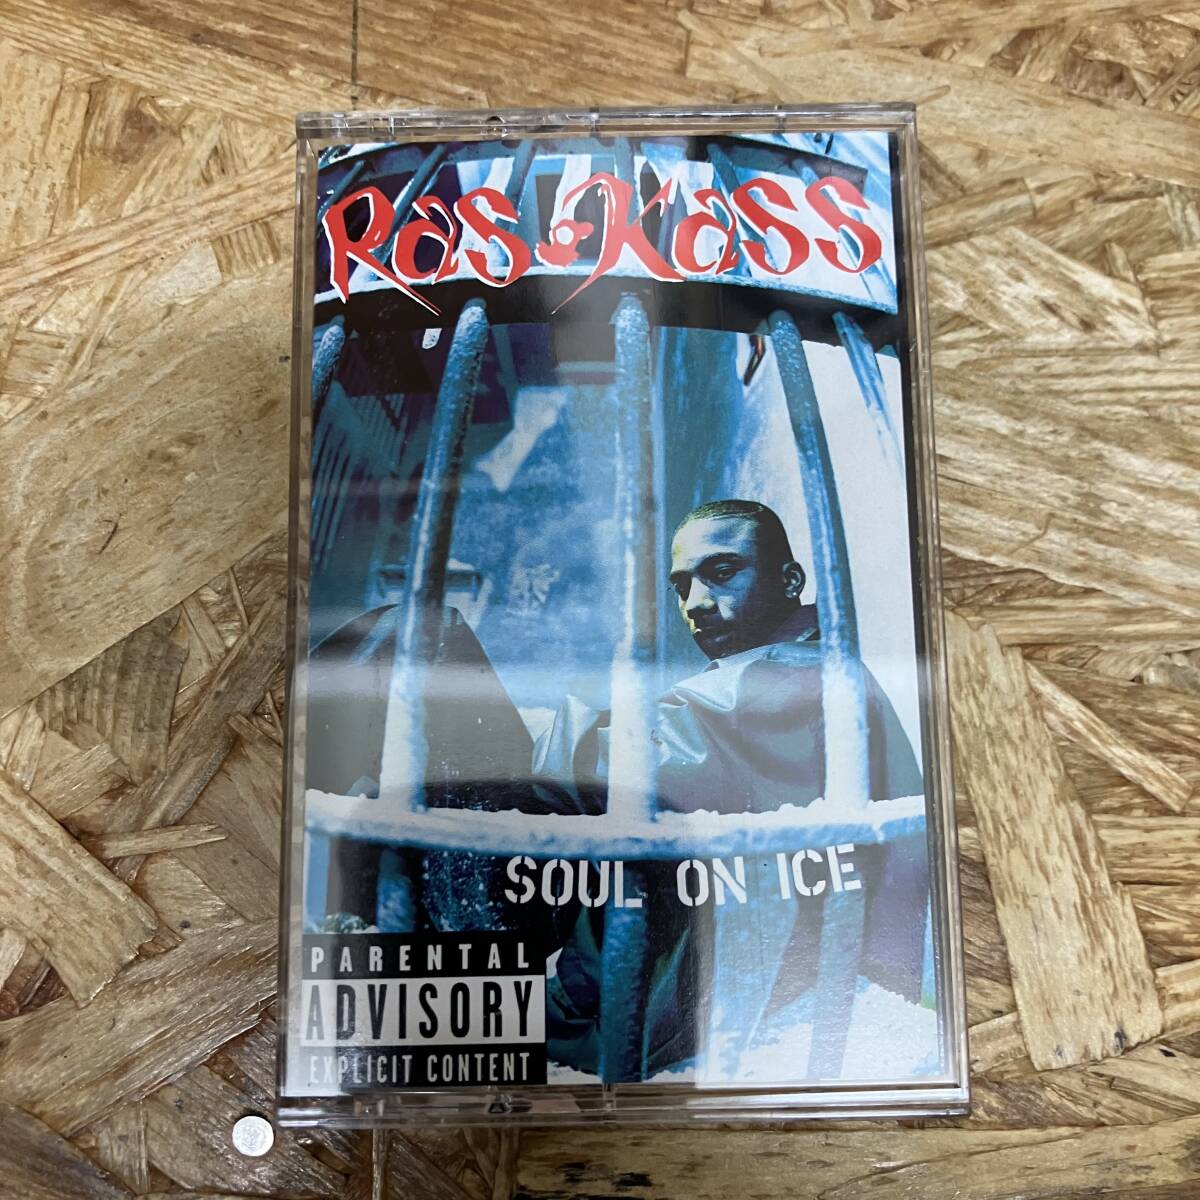 siHIPHOP,R&B RAS KASS - SOUL ON ICE album TAPE secondhand goods 